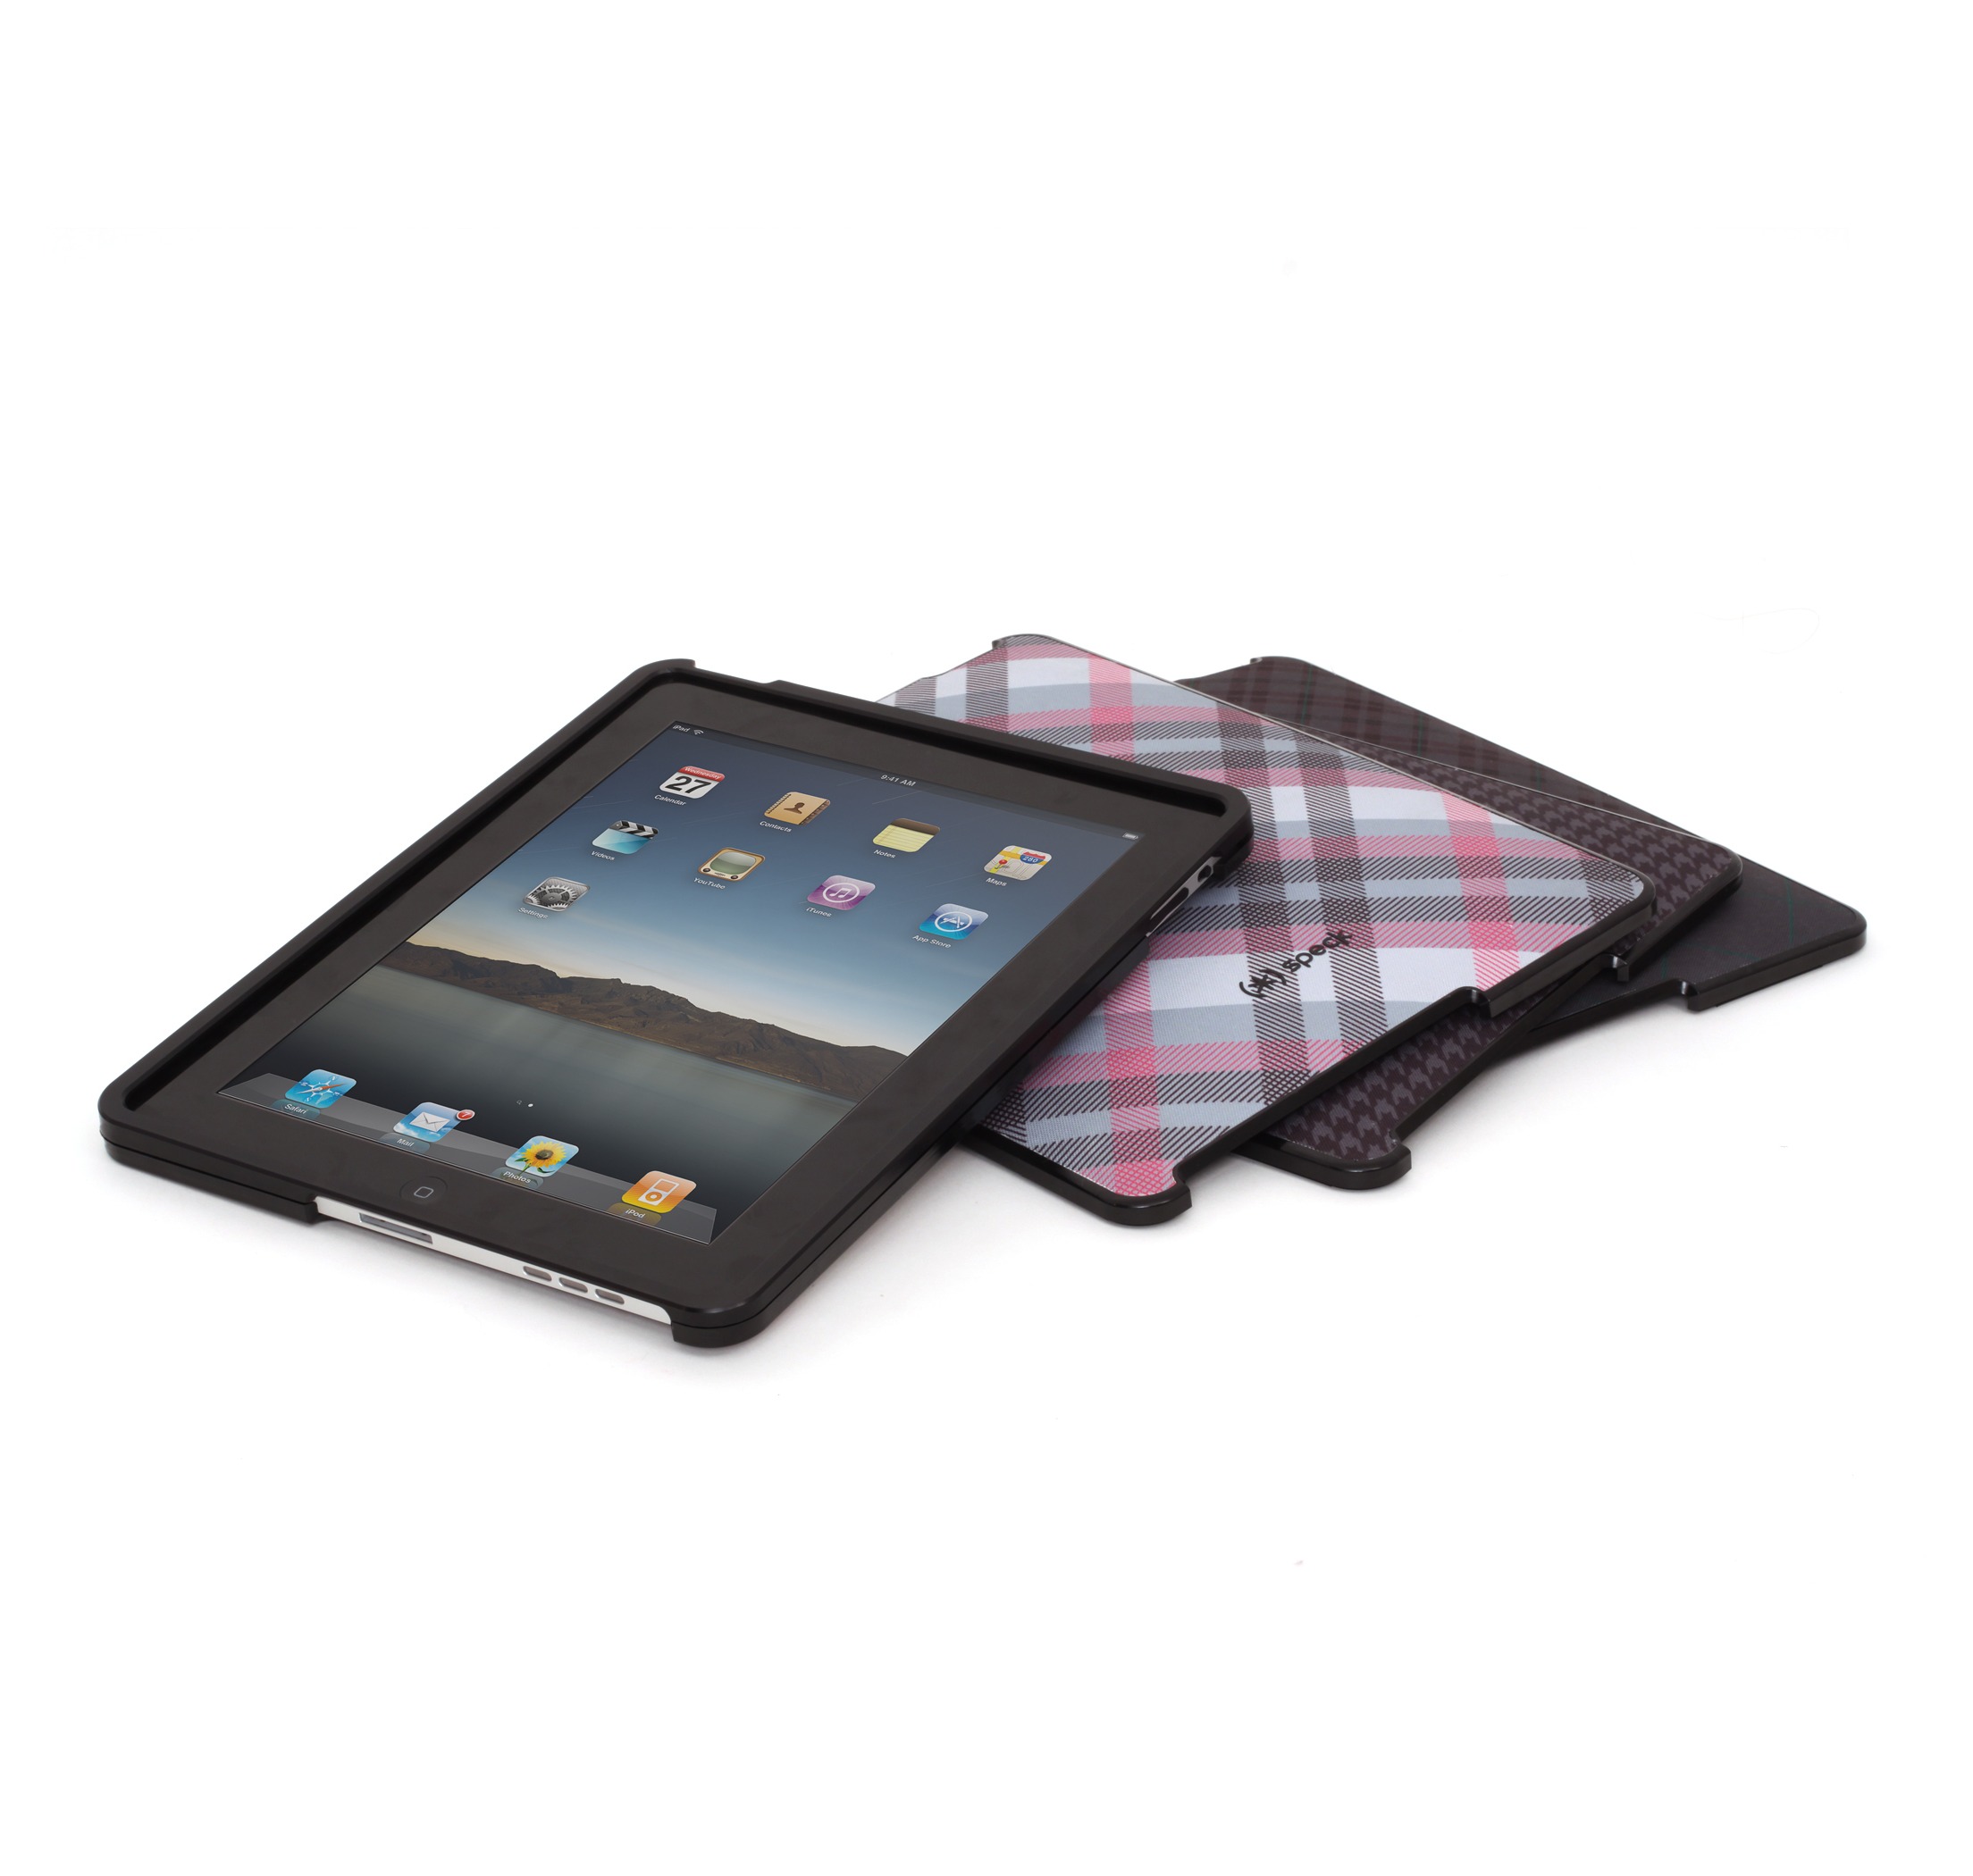 The Cool Collection Of iPad Cases